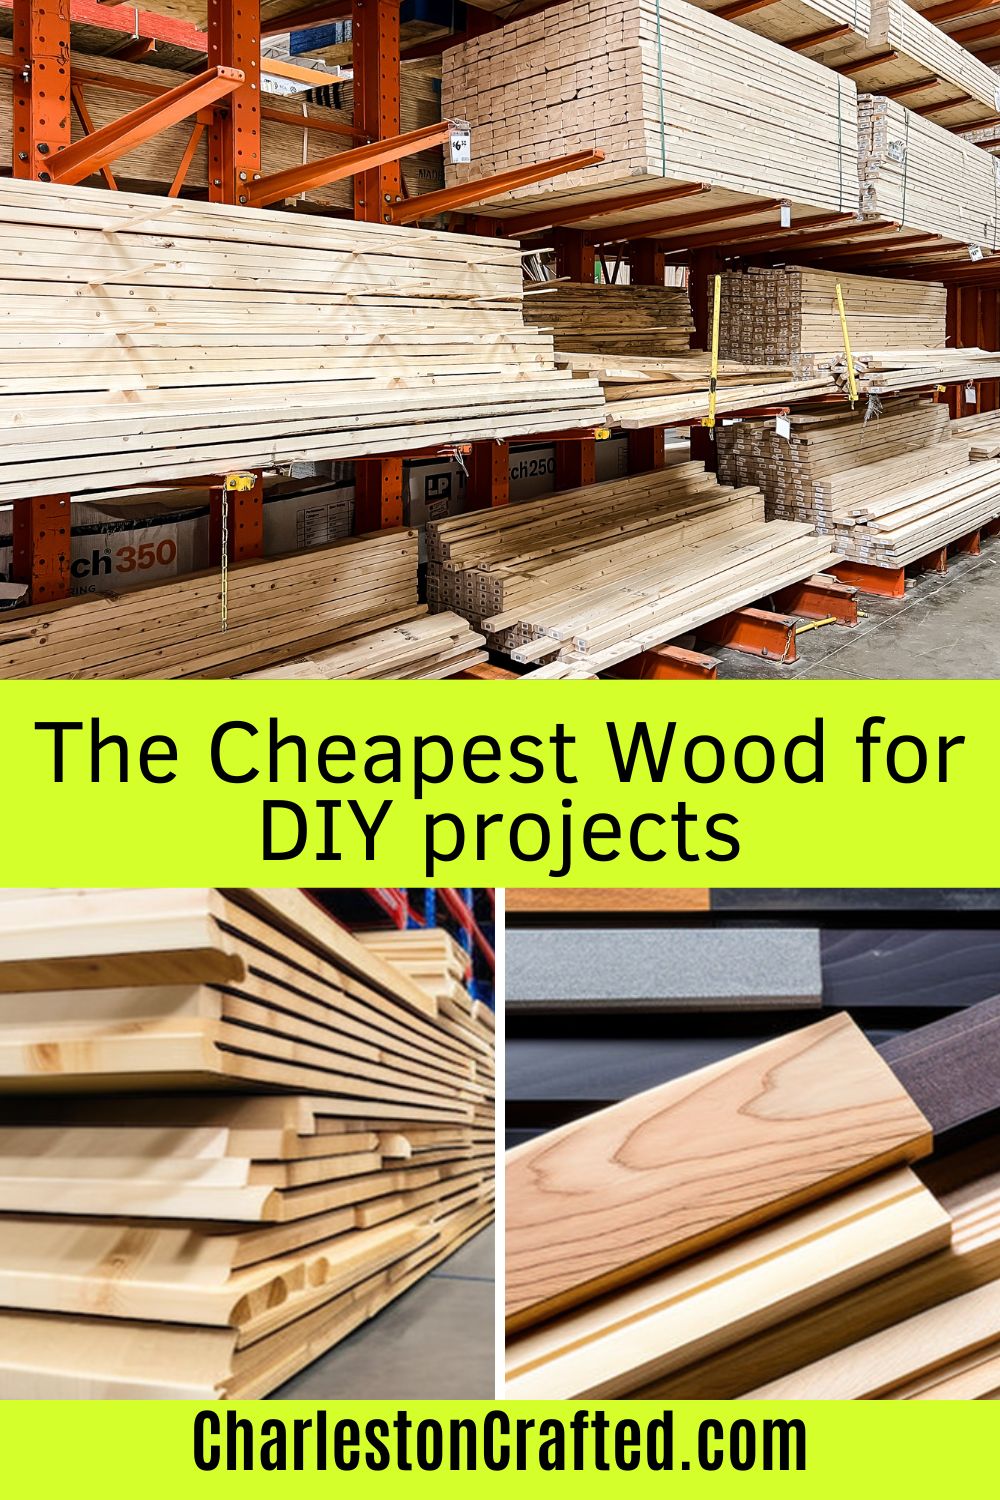 What is the cheapest wood for DIY projects?